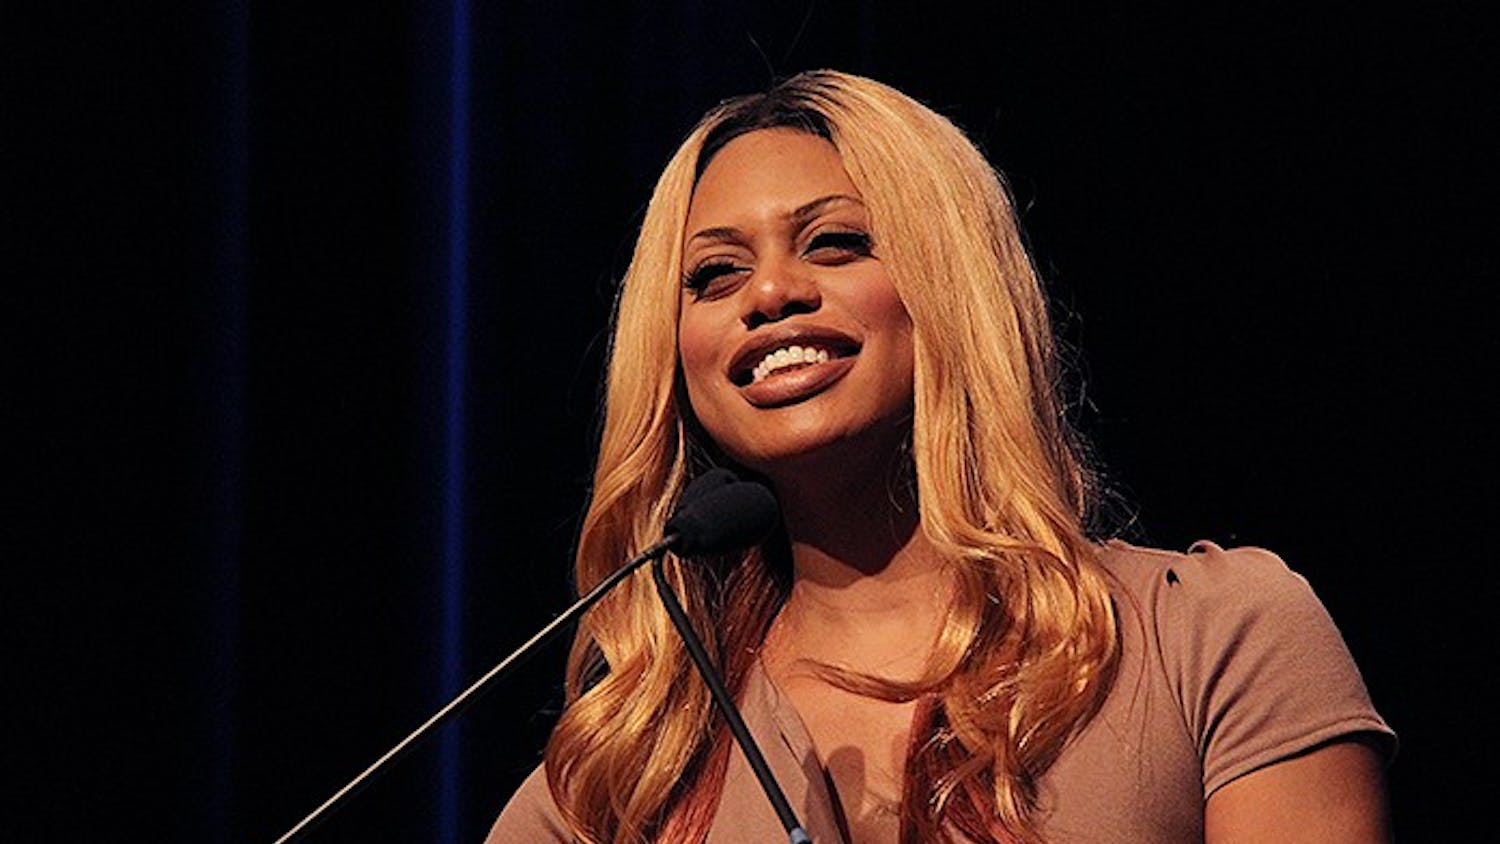 	Laverne Cox speaks in the Great Hall of the Student Union Tuesday night at 7 p.m. about her experiences in her transformation as a transgender woman.